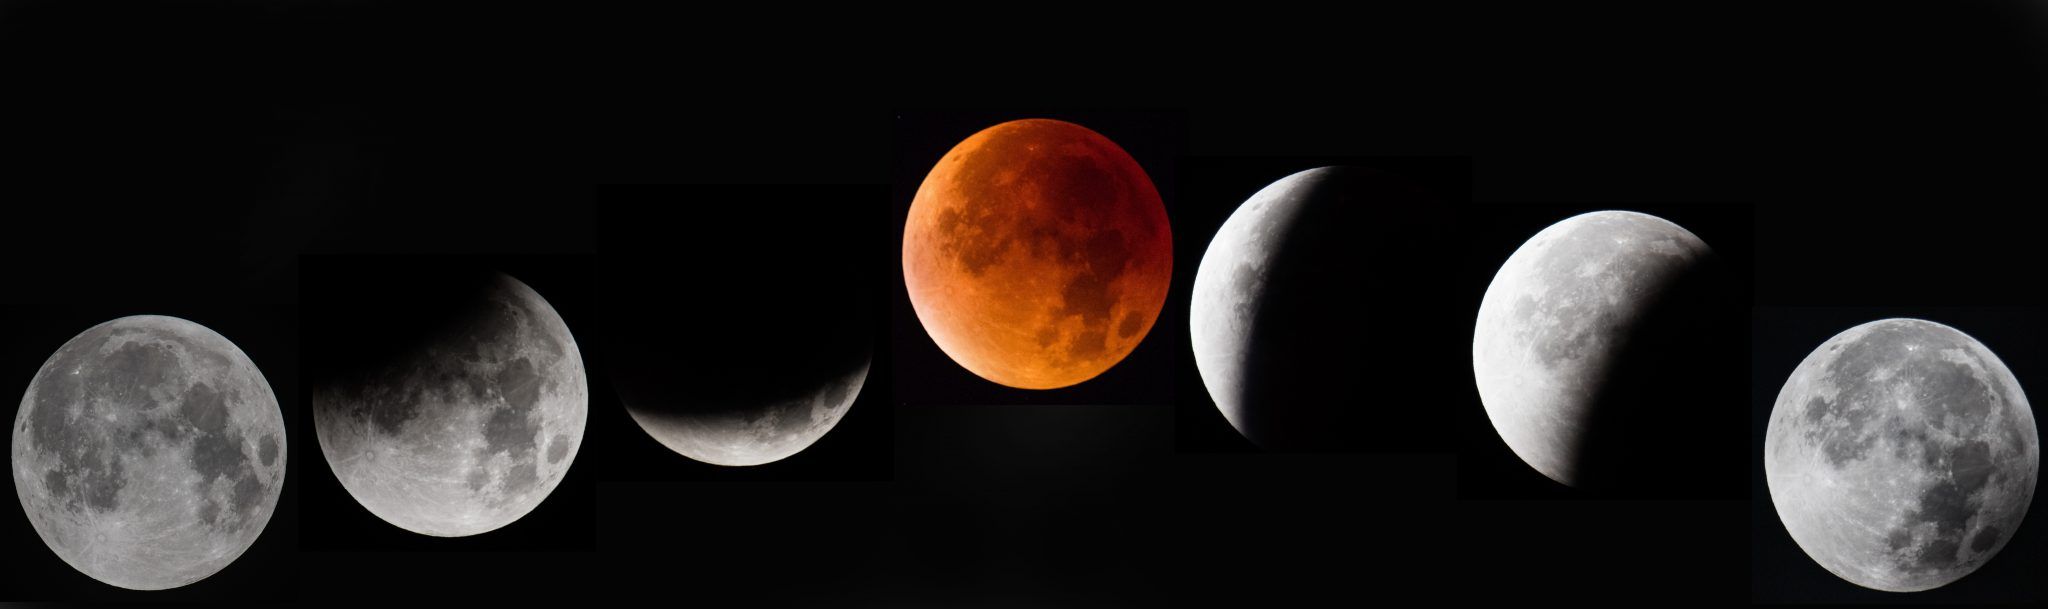 GLASTONBURY, UNITED KINGDOM - SEPTEMBER 28: (EDITORS NOTE: Image was created as a digital composite) In this composite image of seven different photographs the moon is seen as it enters and leaves a lunar eclipse on September 28, 2015 in Glastonbury, England. Tonight's supermoon - so called because it is the closest full moon to the Earth this year - is particularly rare as it coincides with a lunar eclipse, a combination that has not happened since 1982 and won't happen again until 2033. (Photo by Matt Cardy/Getty Images)